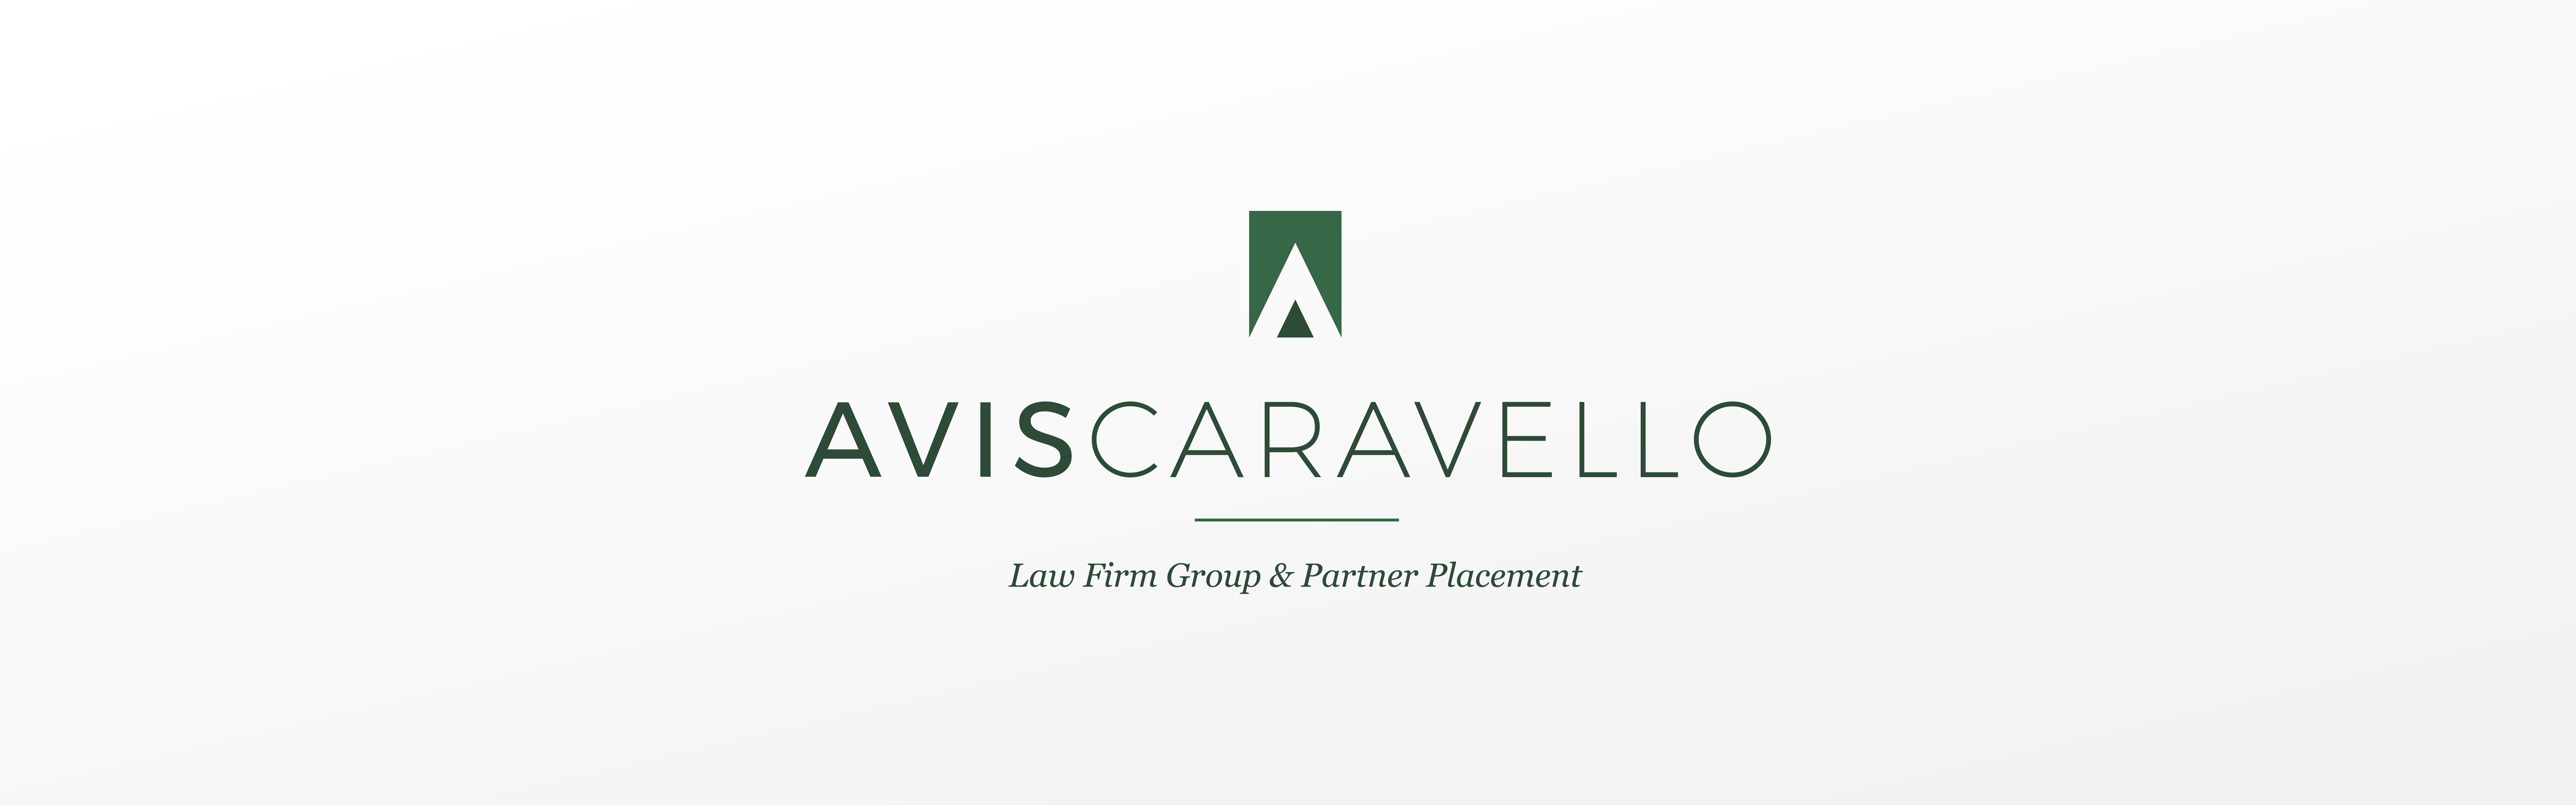 The image displays the logo of 'Avis Caravello - Law Firm Group & Partner Placement' on a white background, indicating a professional services brand specialized in legal recruitment and placement.